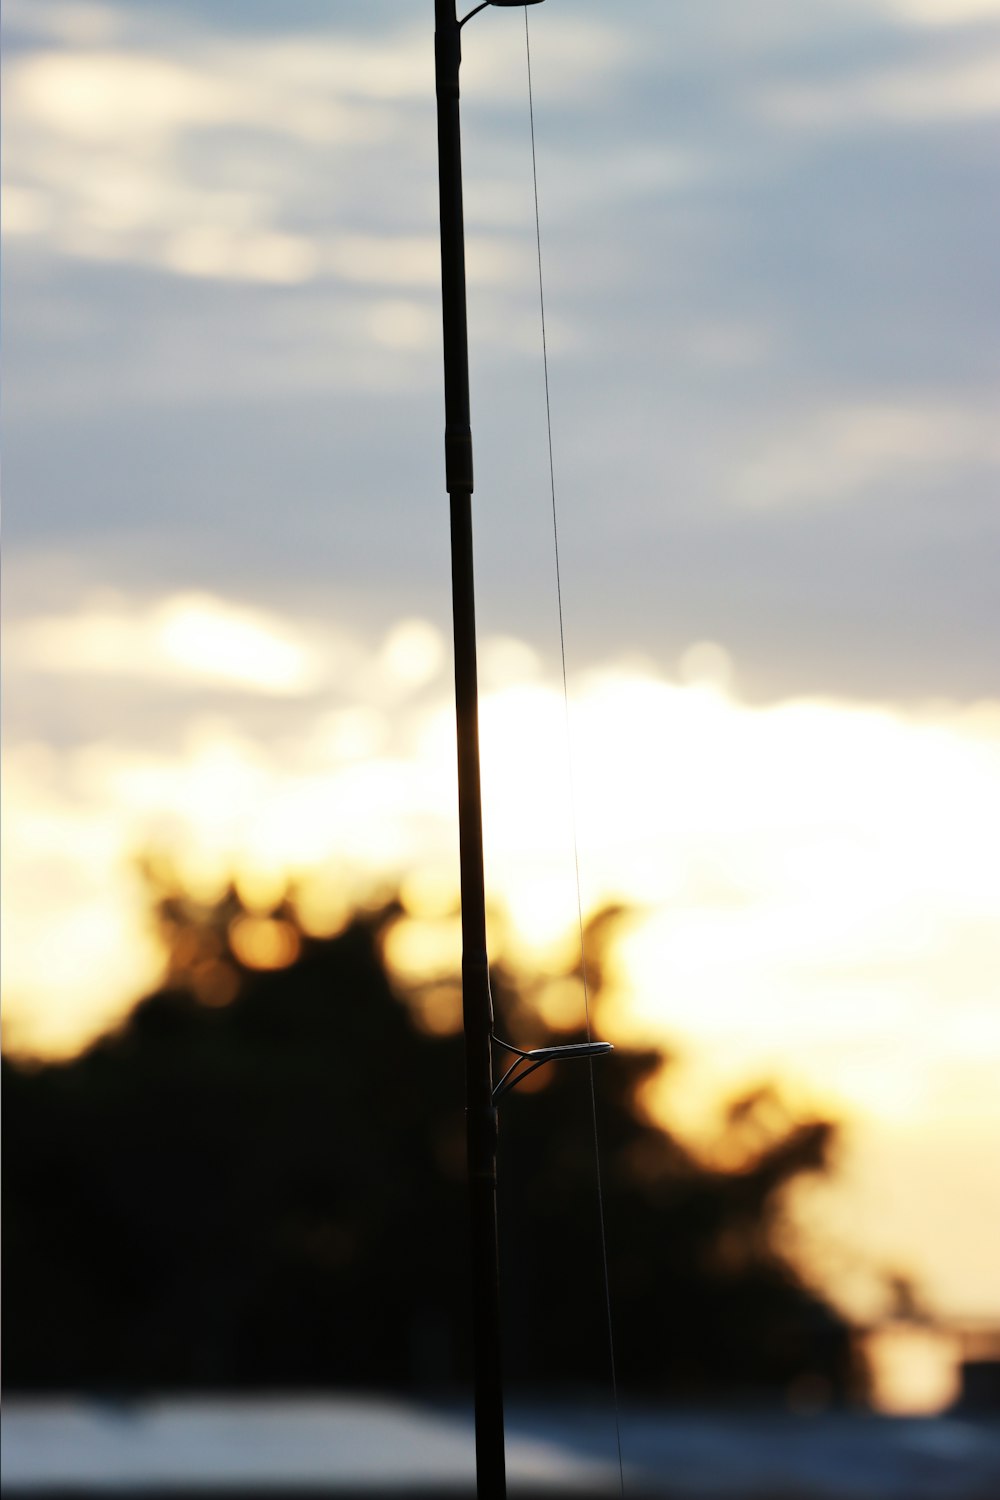 a street light on a pole with a sky in the background